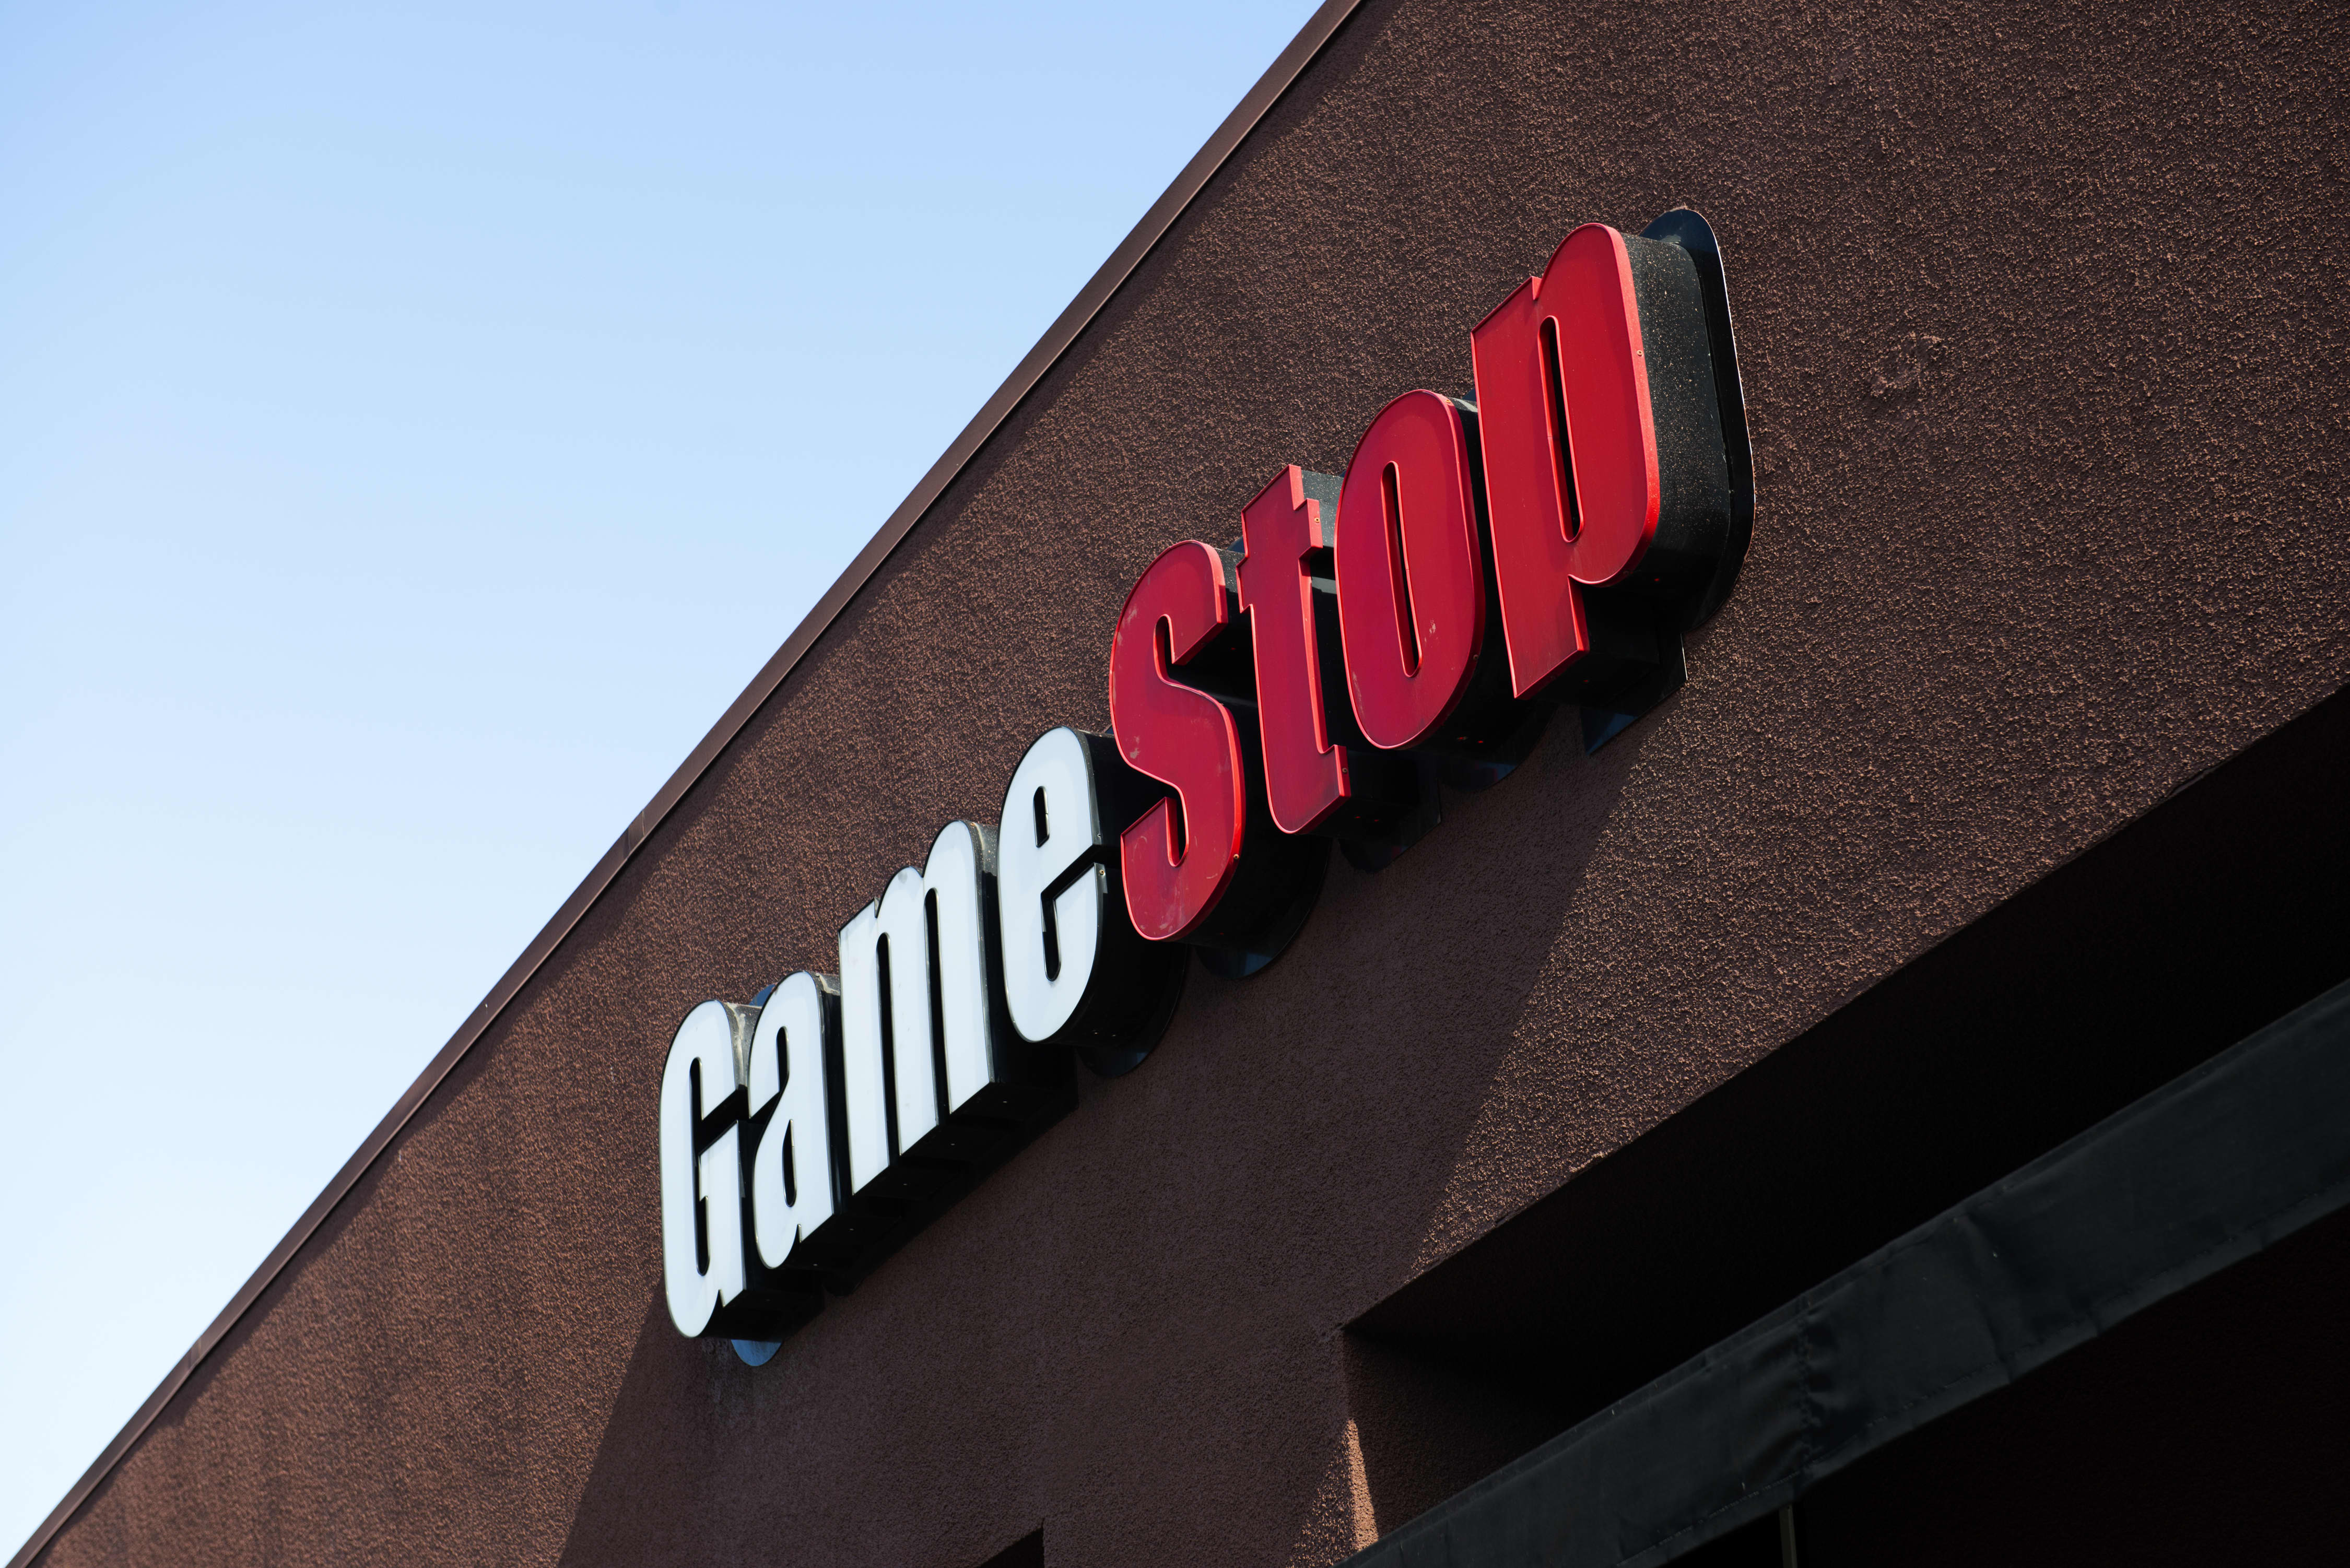 The GameStop frenzy leads to unrealistic expectations of returns